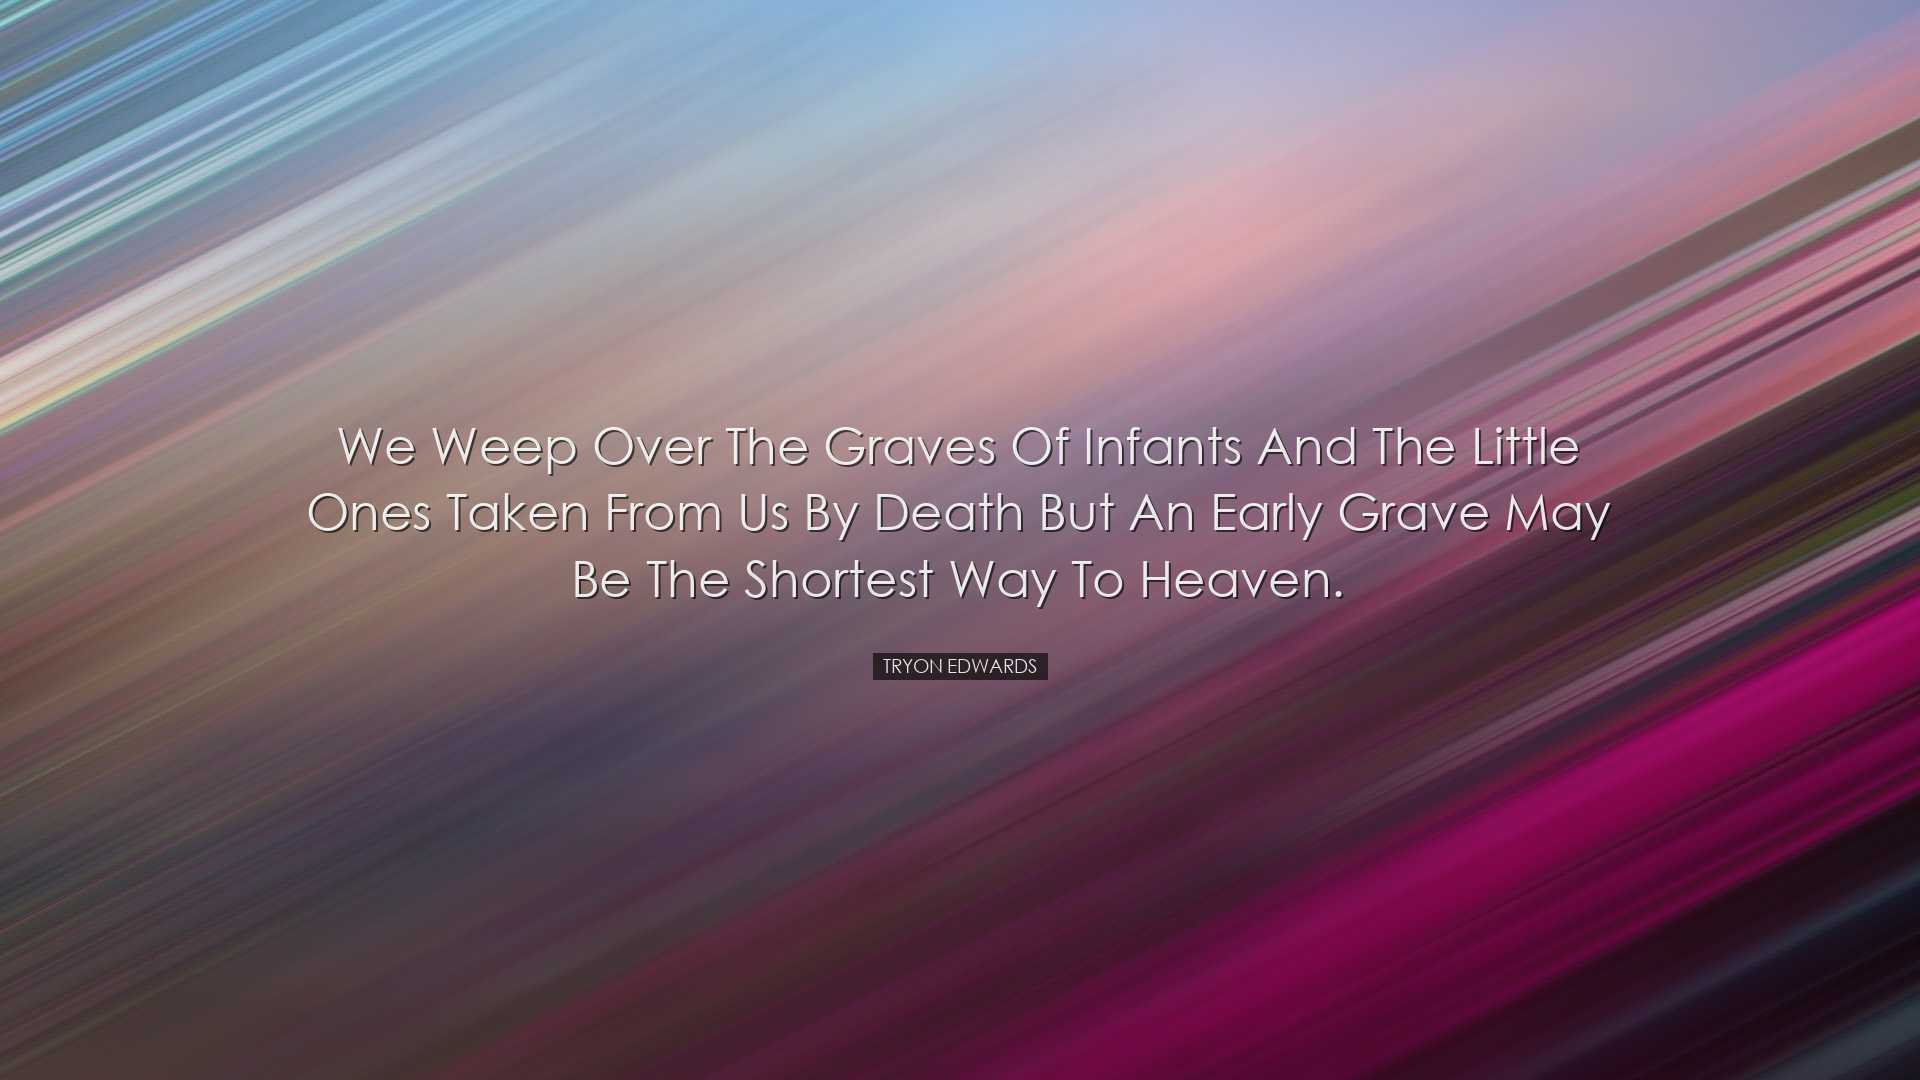 We weep over the graves of infants and the little ones taken from